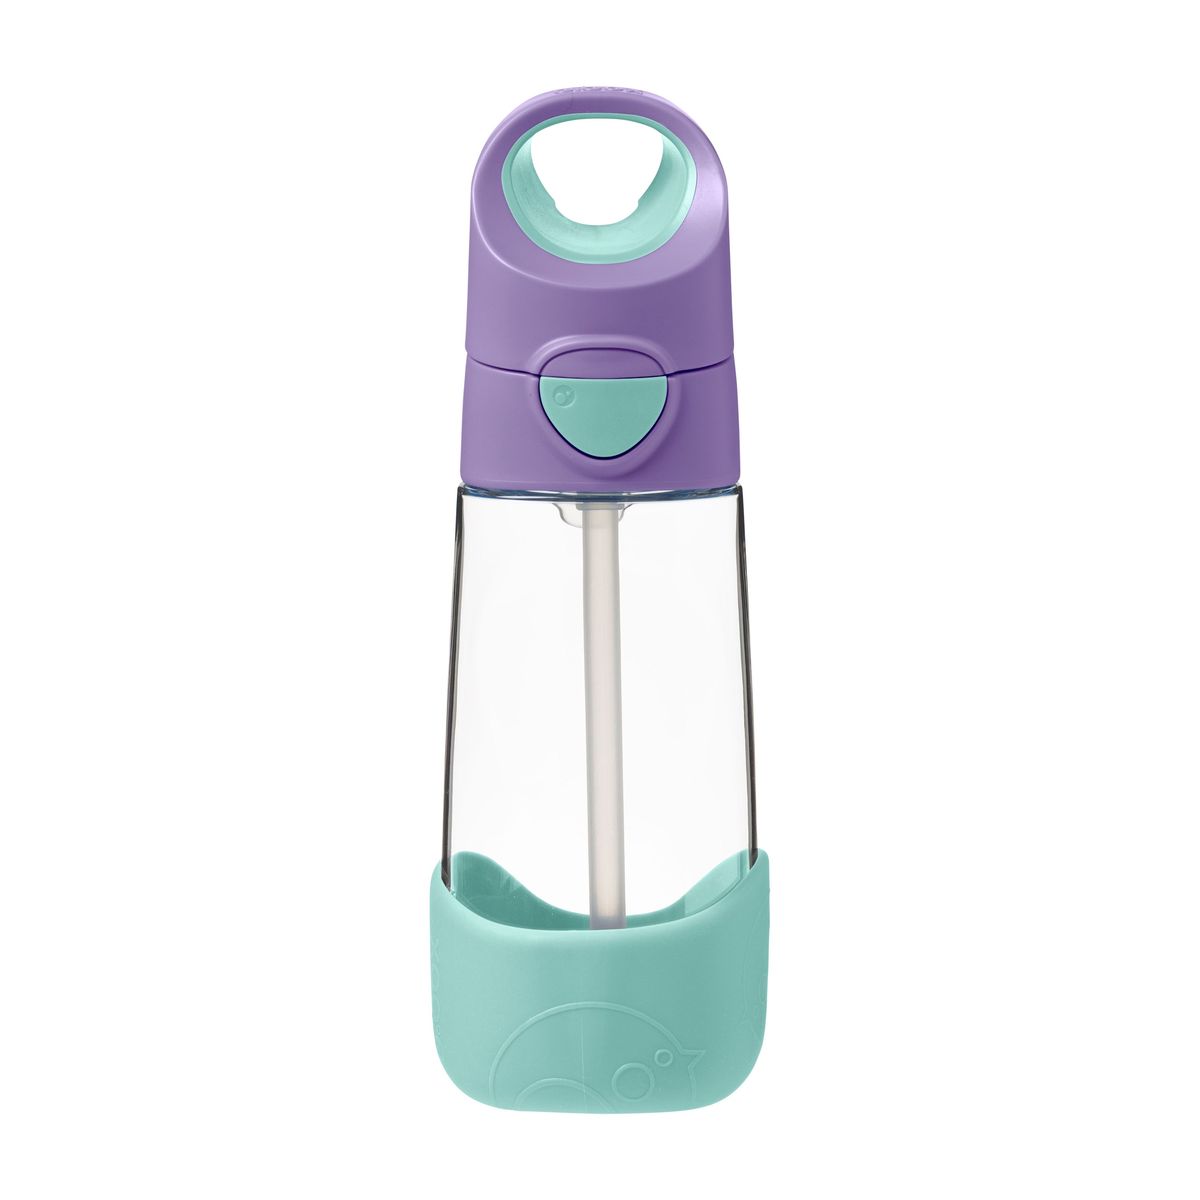 B.box Kids Drink Bottle in Lilac Pop available at Bear & Moo